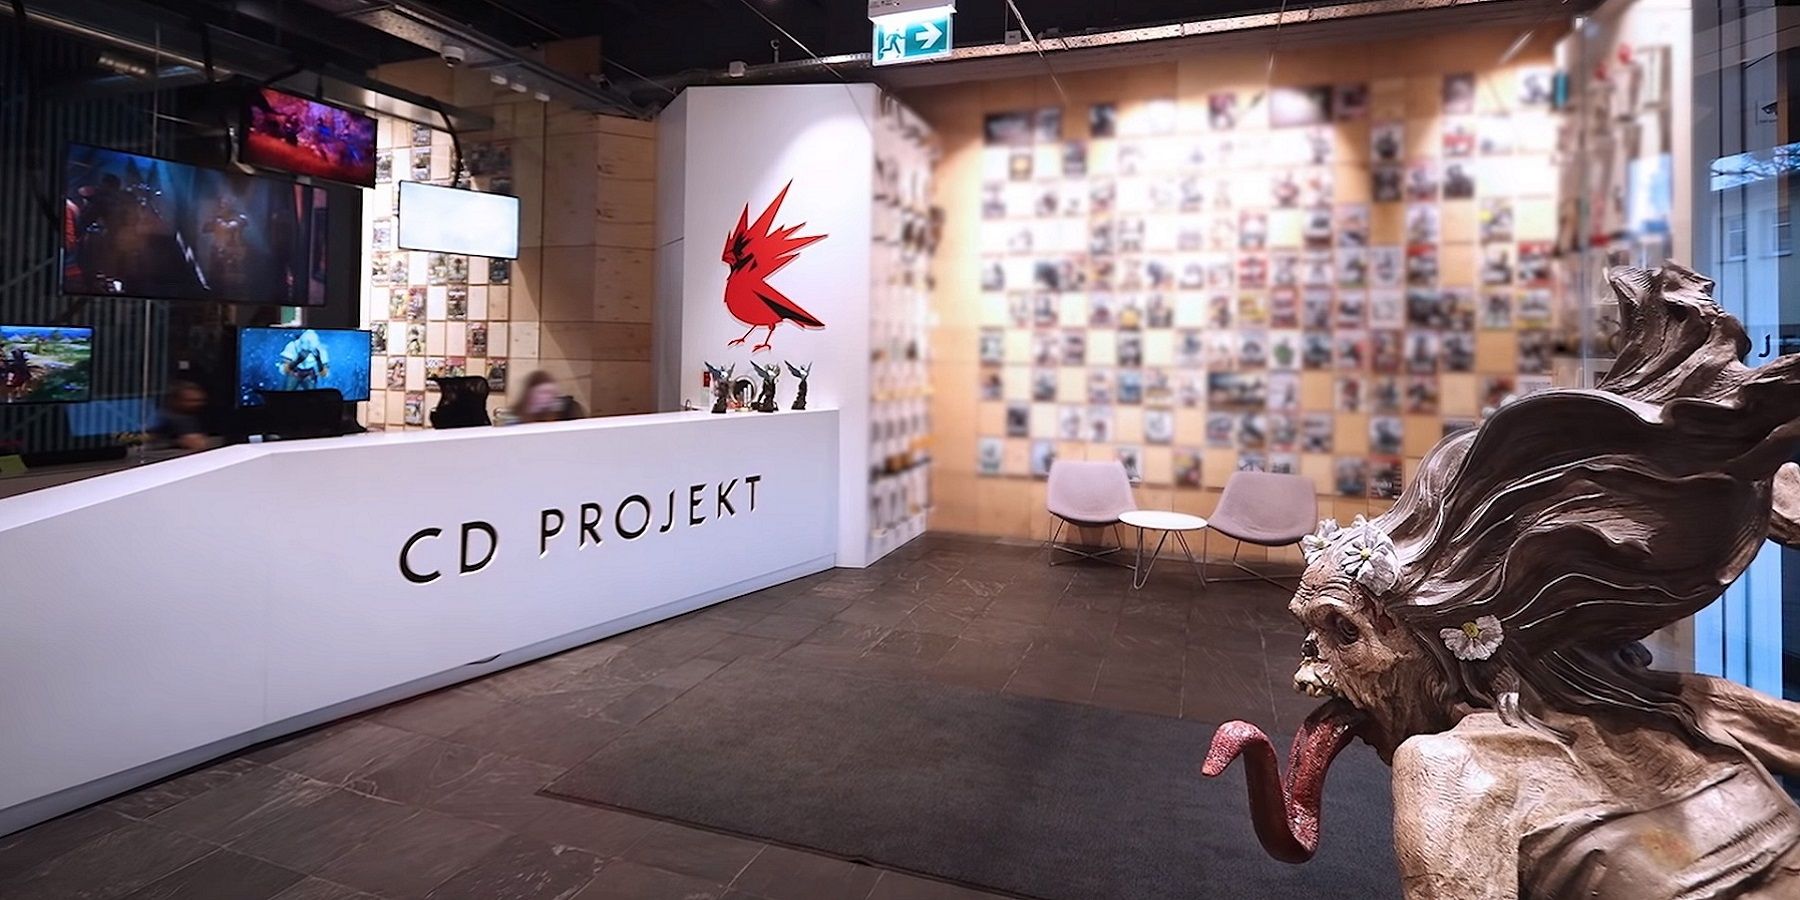 Photo of the CD Projekt Red studio, showing a monster statue in the foreground.